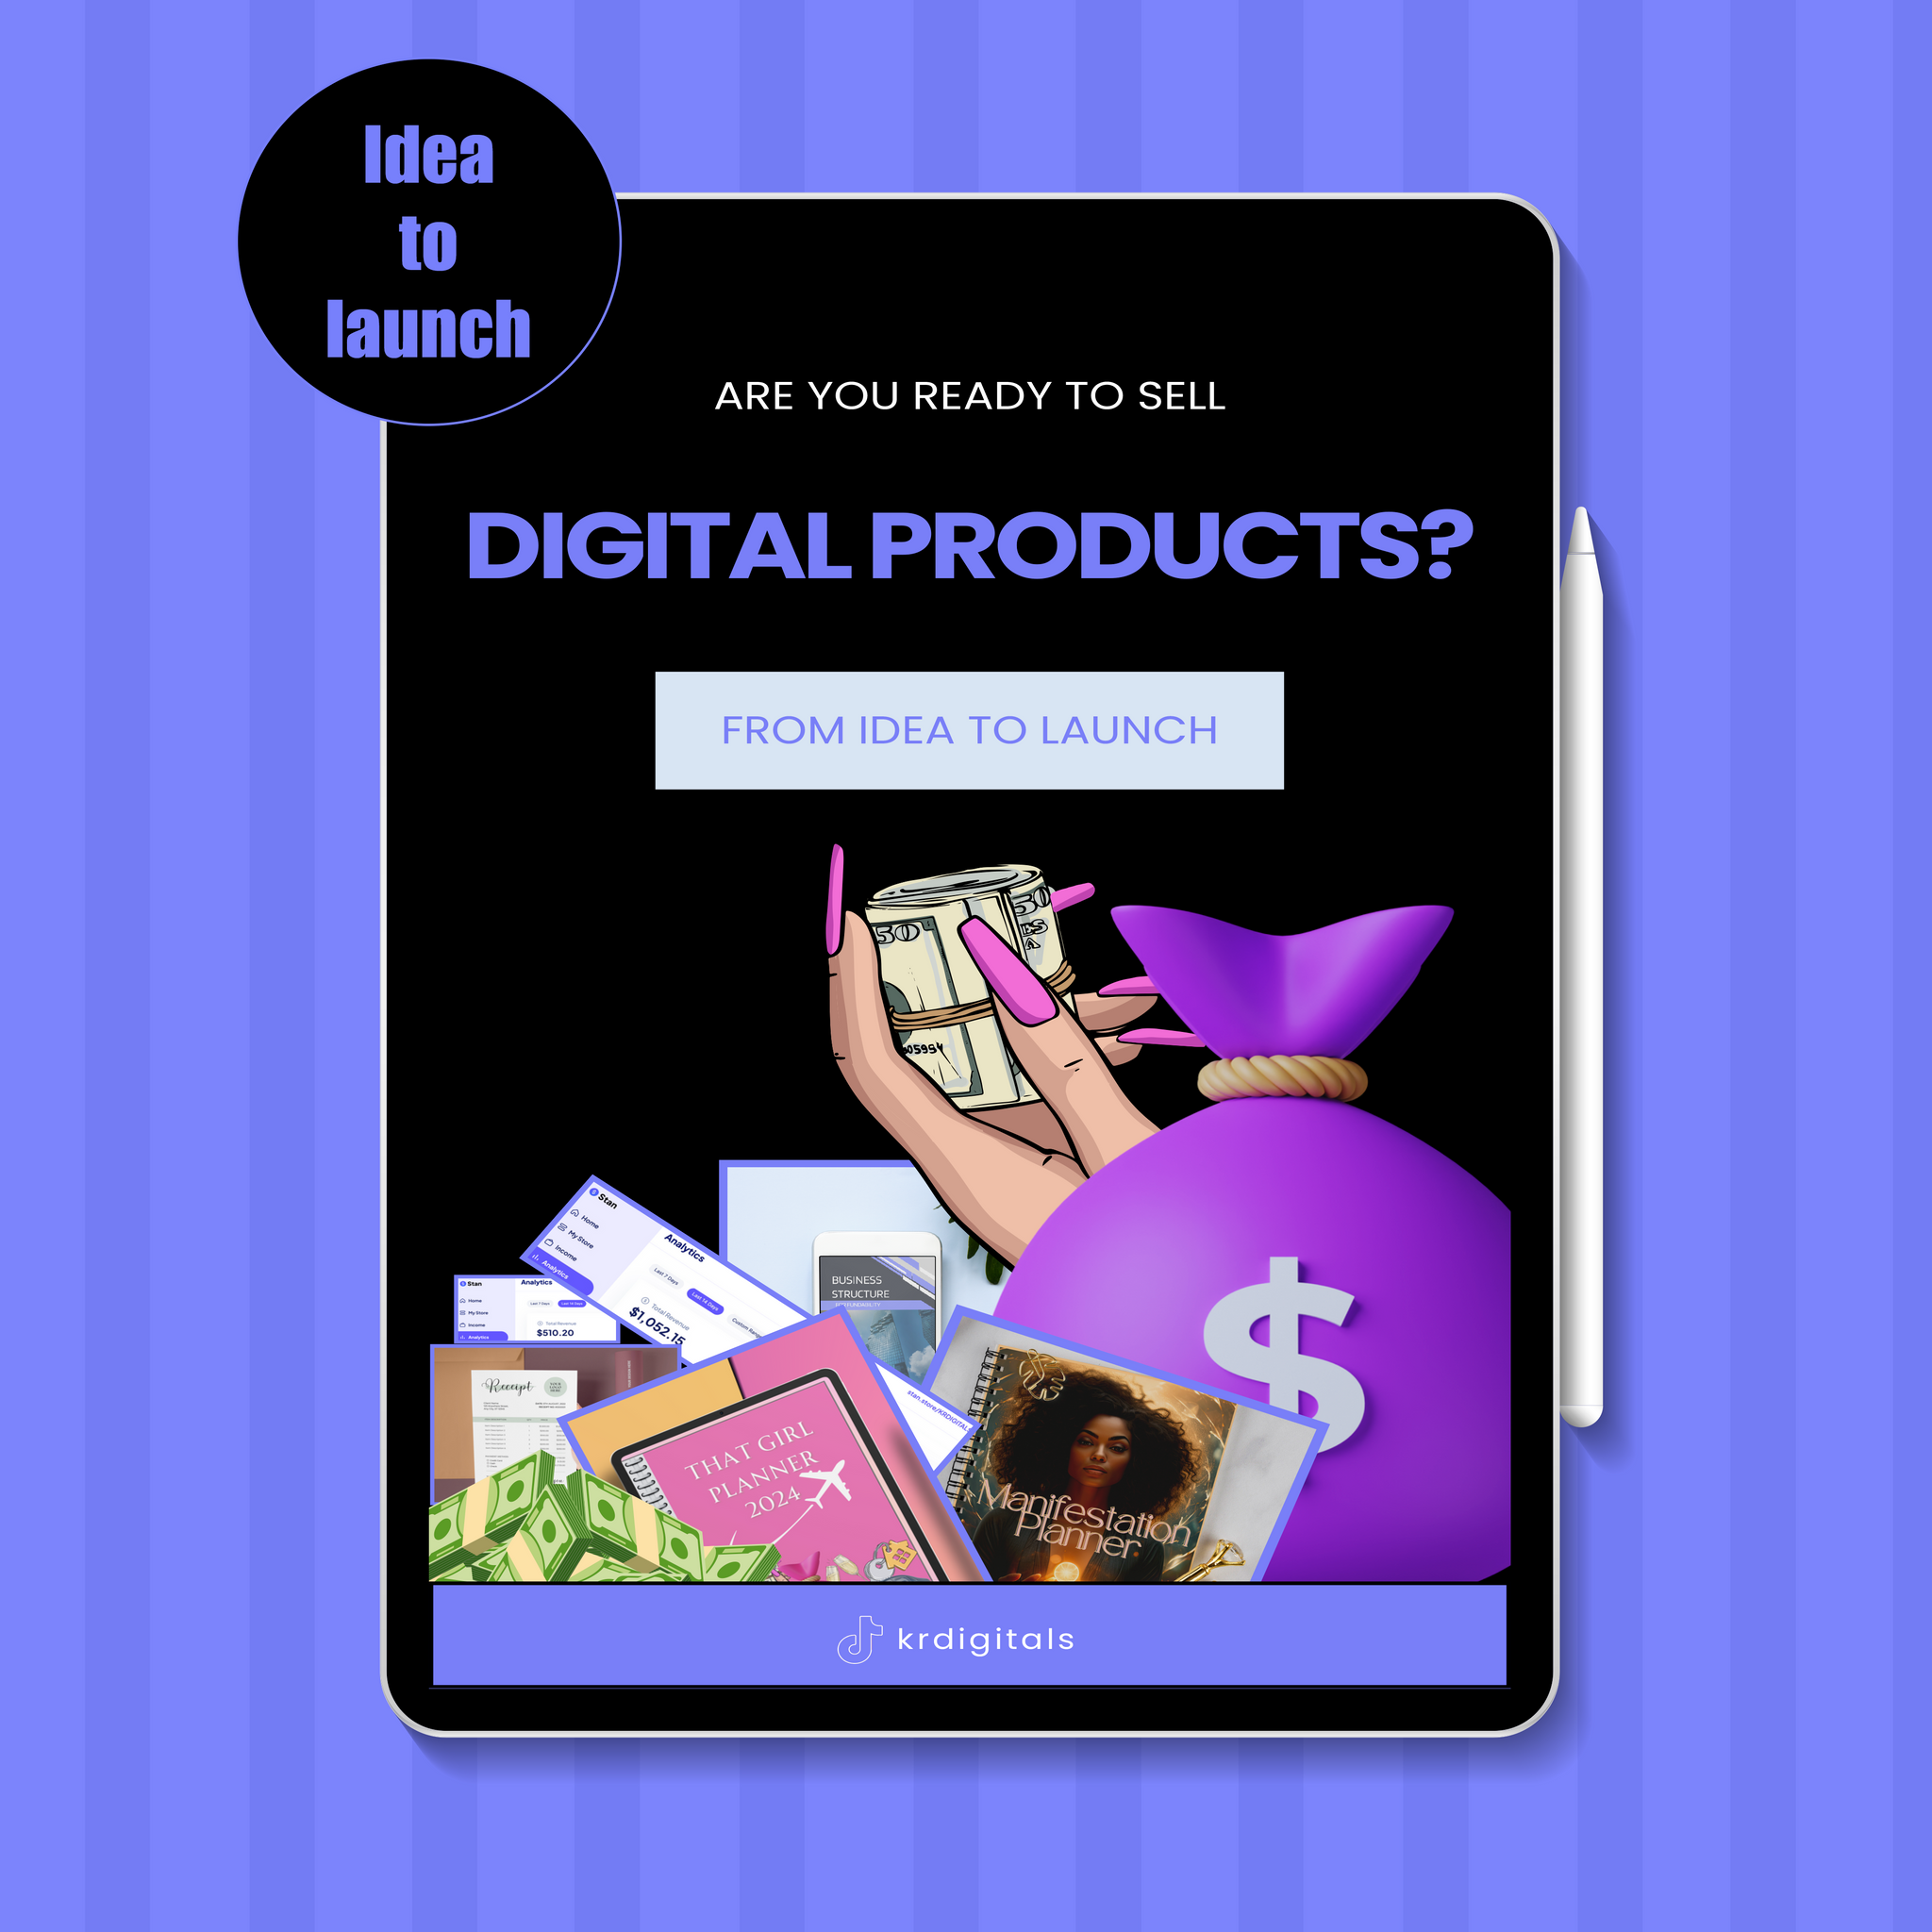 Are you ready to sell digital products?